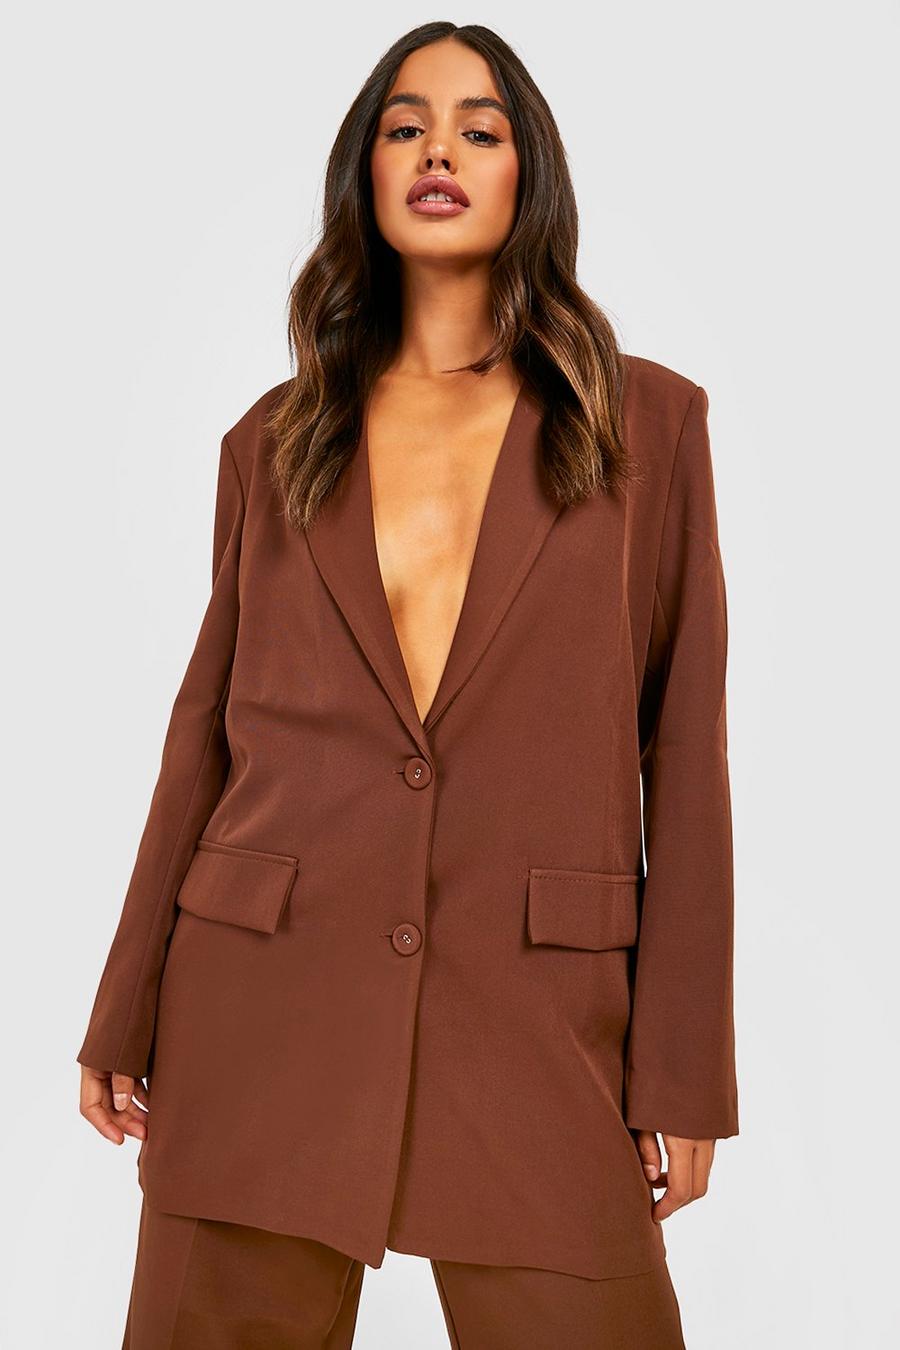 Chocolate brown Tailored Single Breasted Oversized Blazer